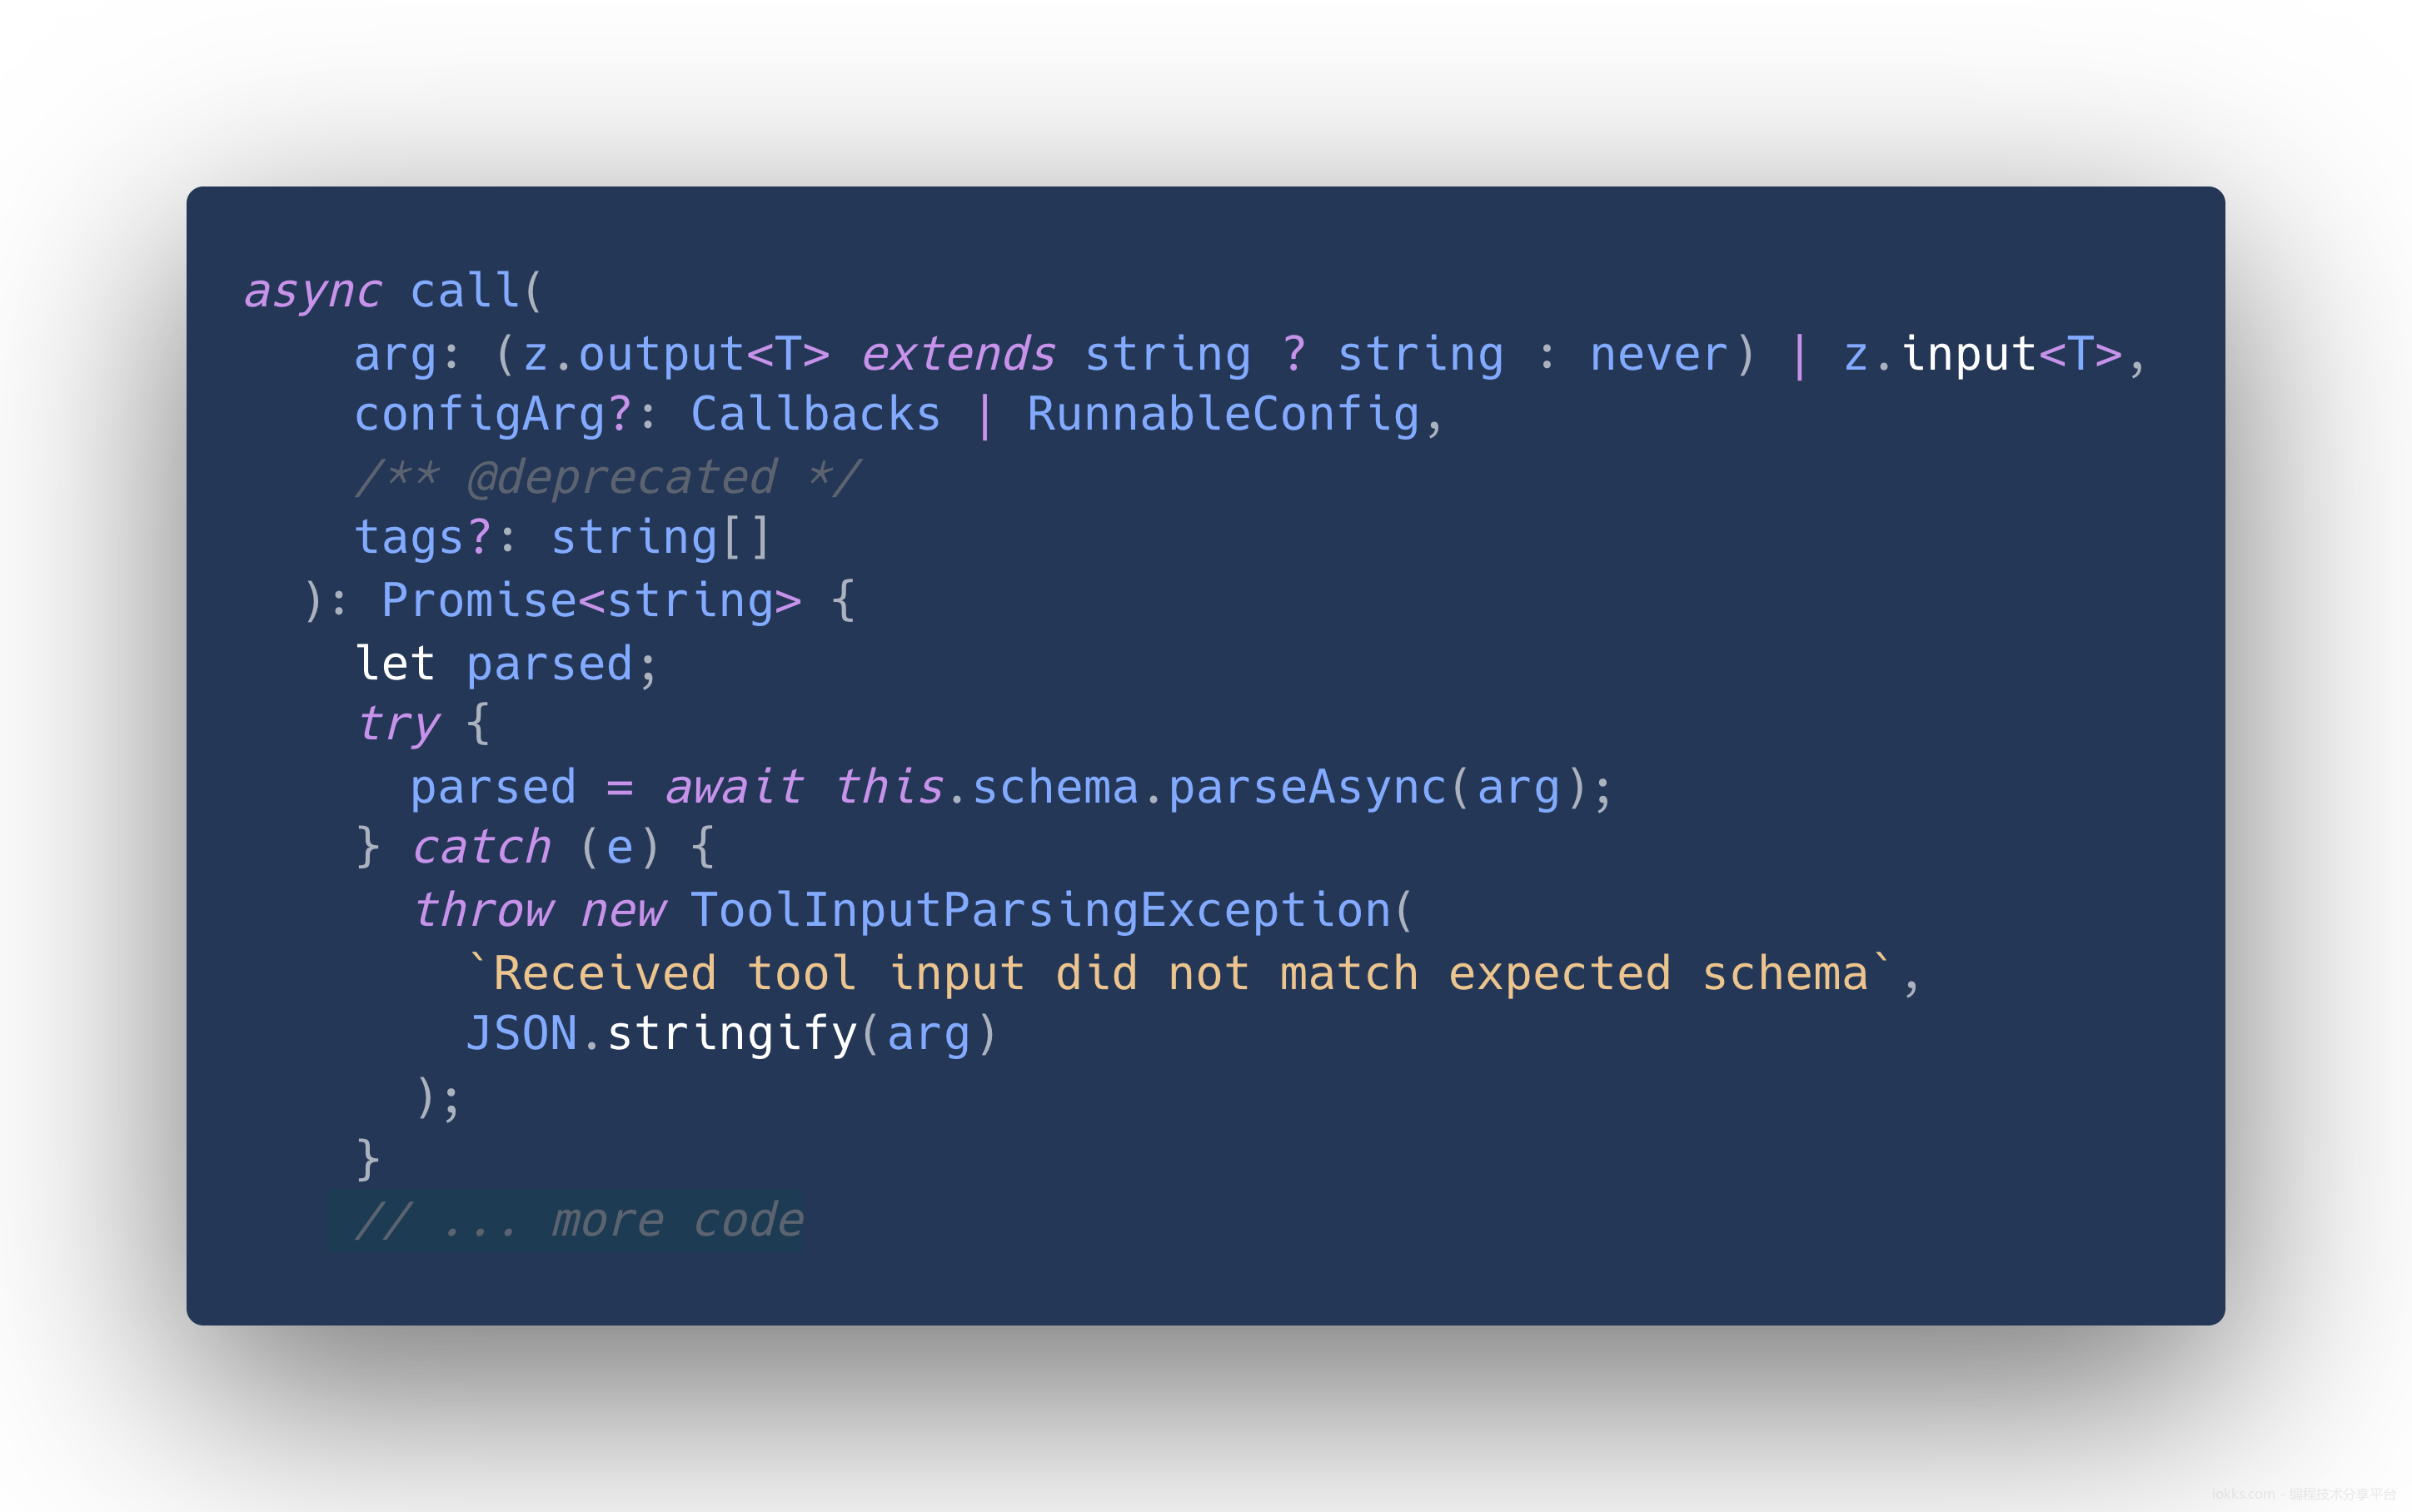 code snippet 2